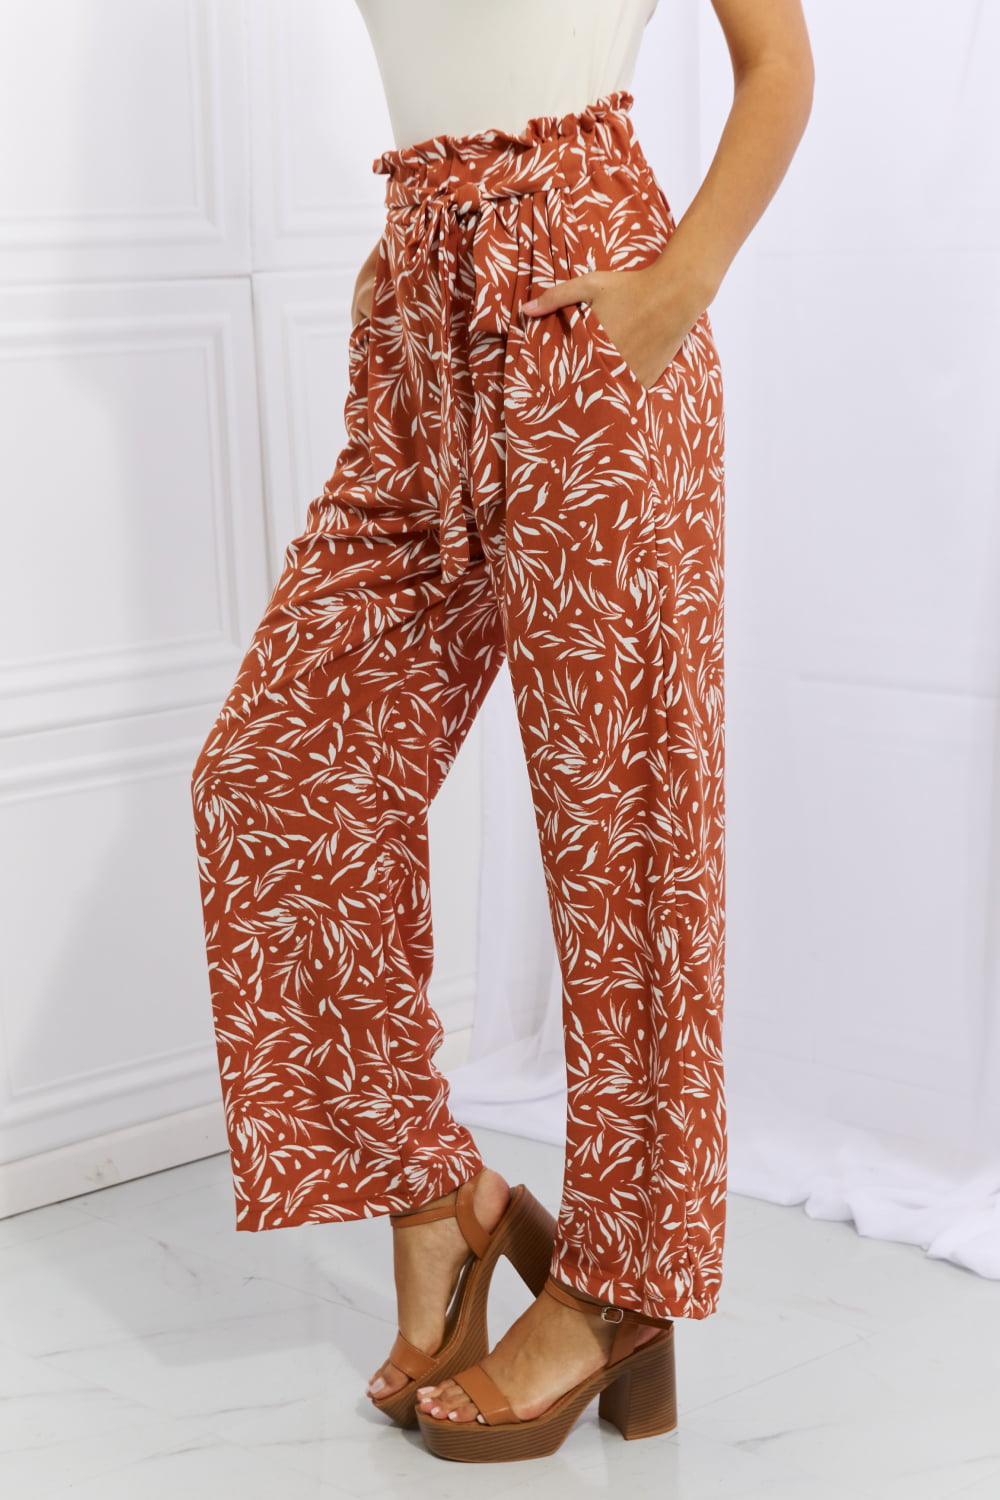 Right Angle Full Size Geometric Printed Pants in Red Orange - Bottoms - Pants - 3 - 2024